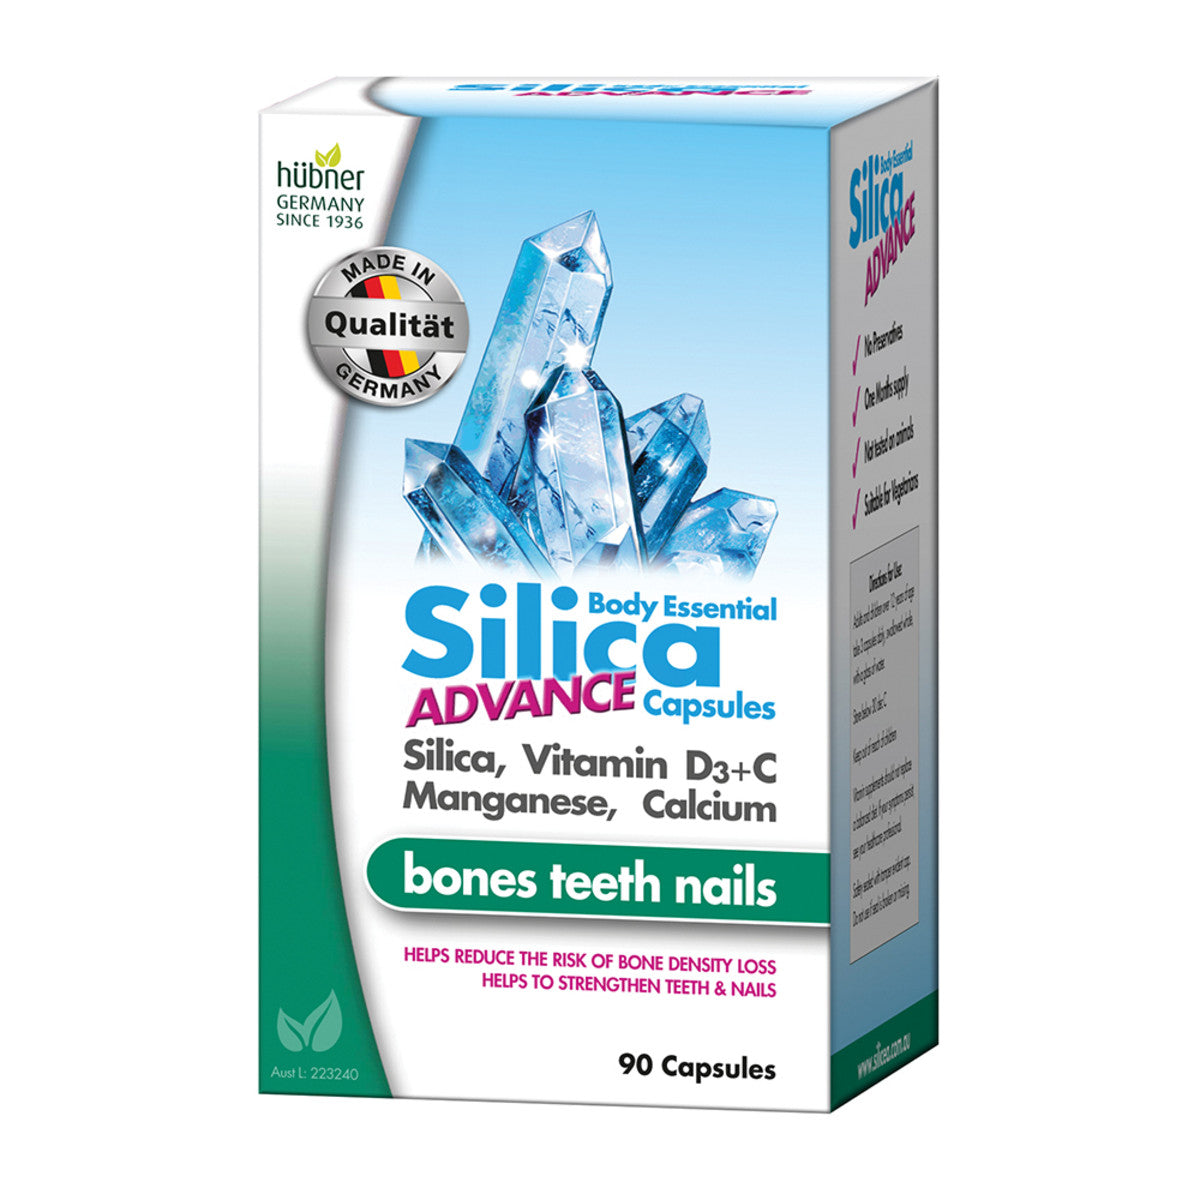 Hubner Silicea Body Essential Silicea 90 Capsules, Advance For Bones, Teeth & Nails